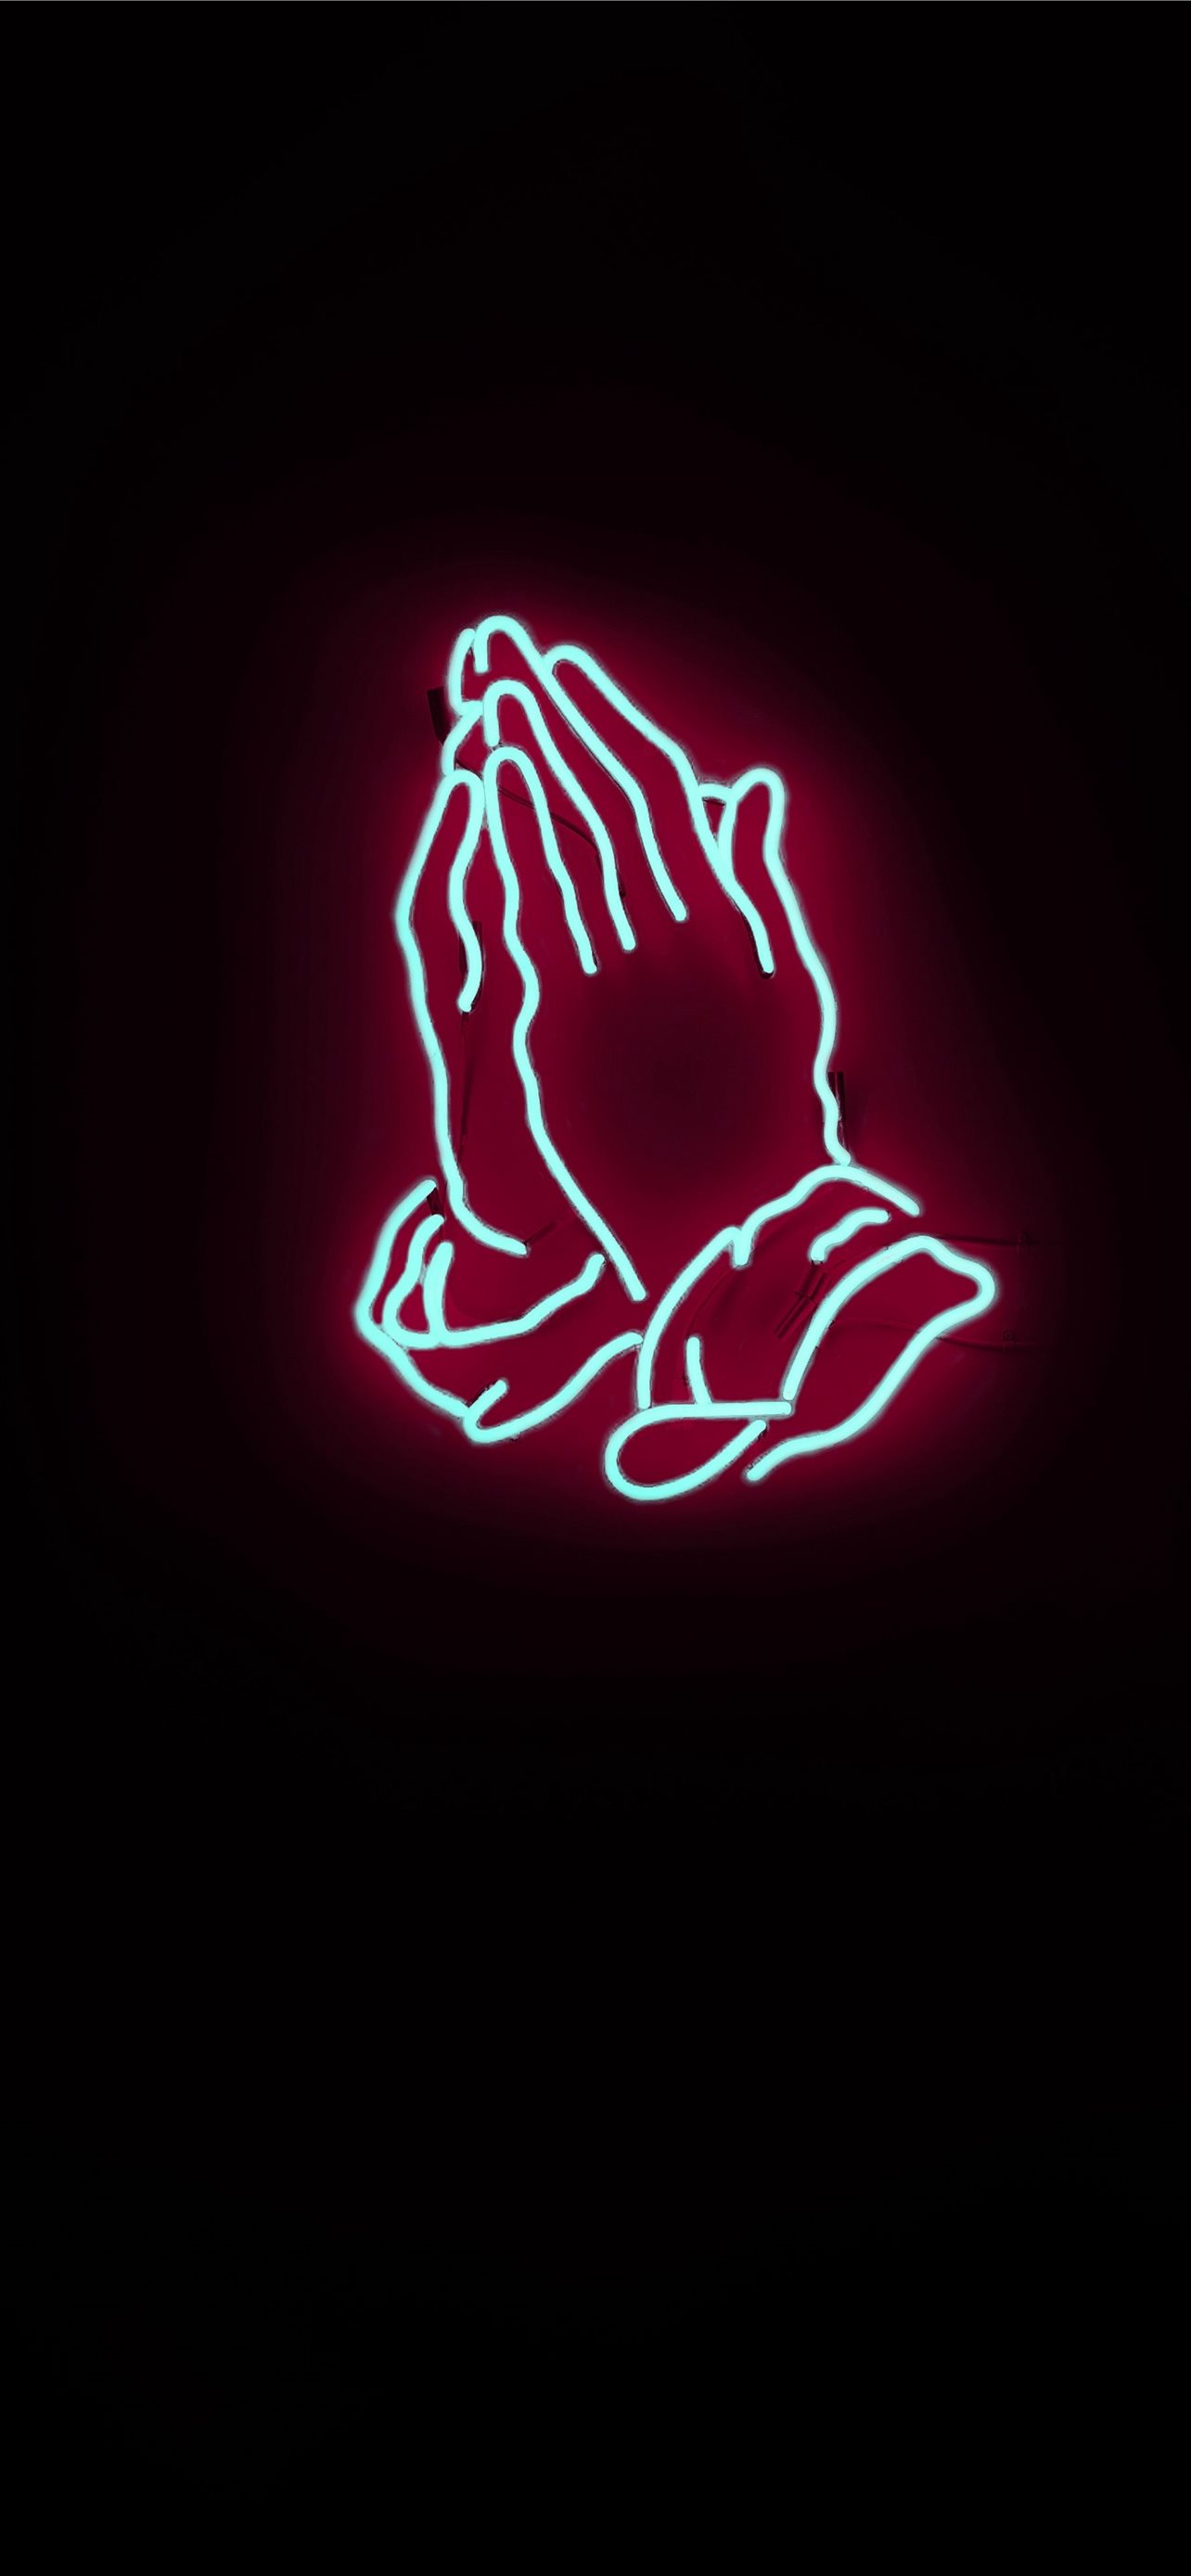 A neon sign of two hands in a praying position - Jesus